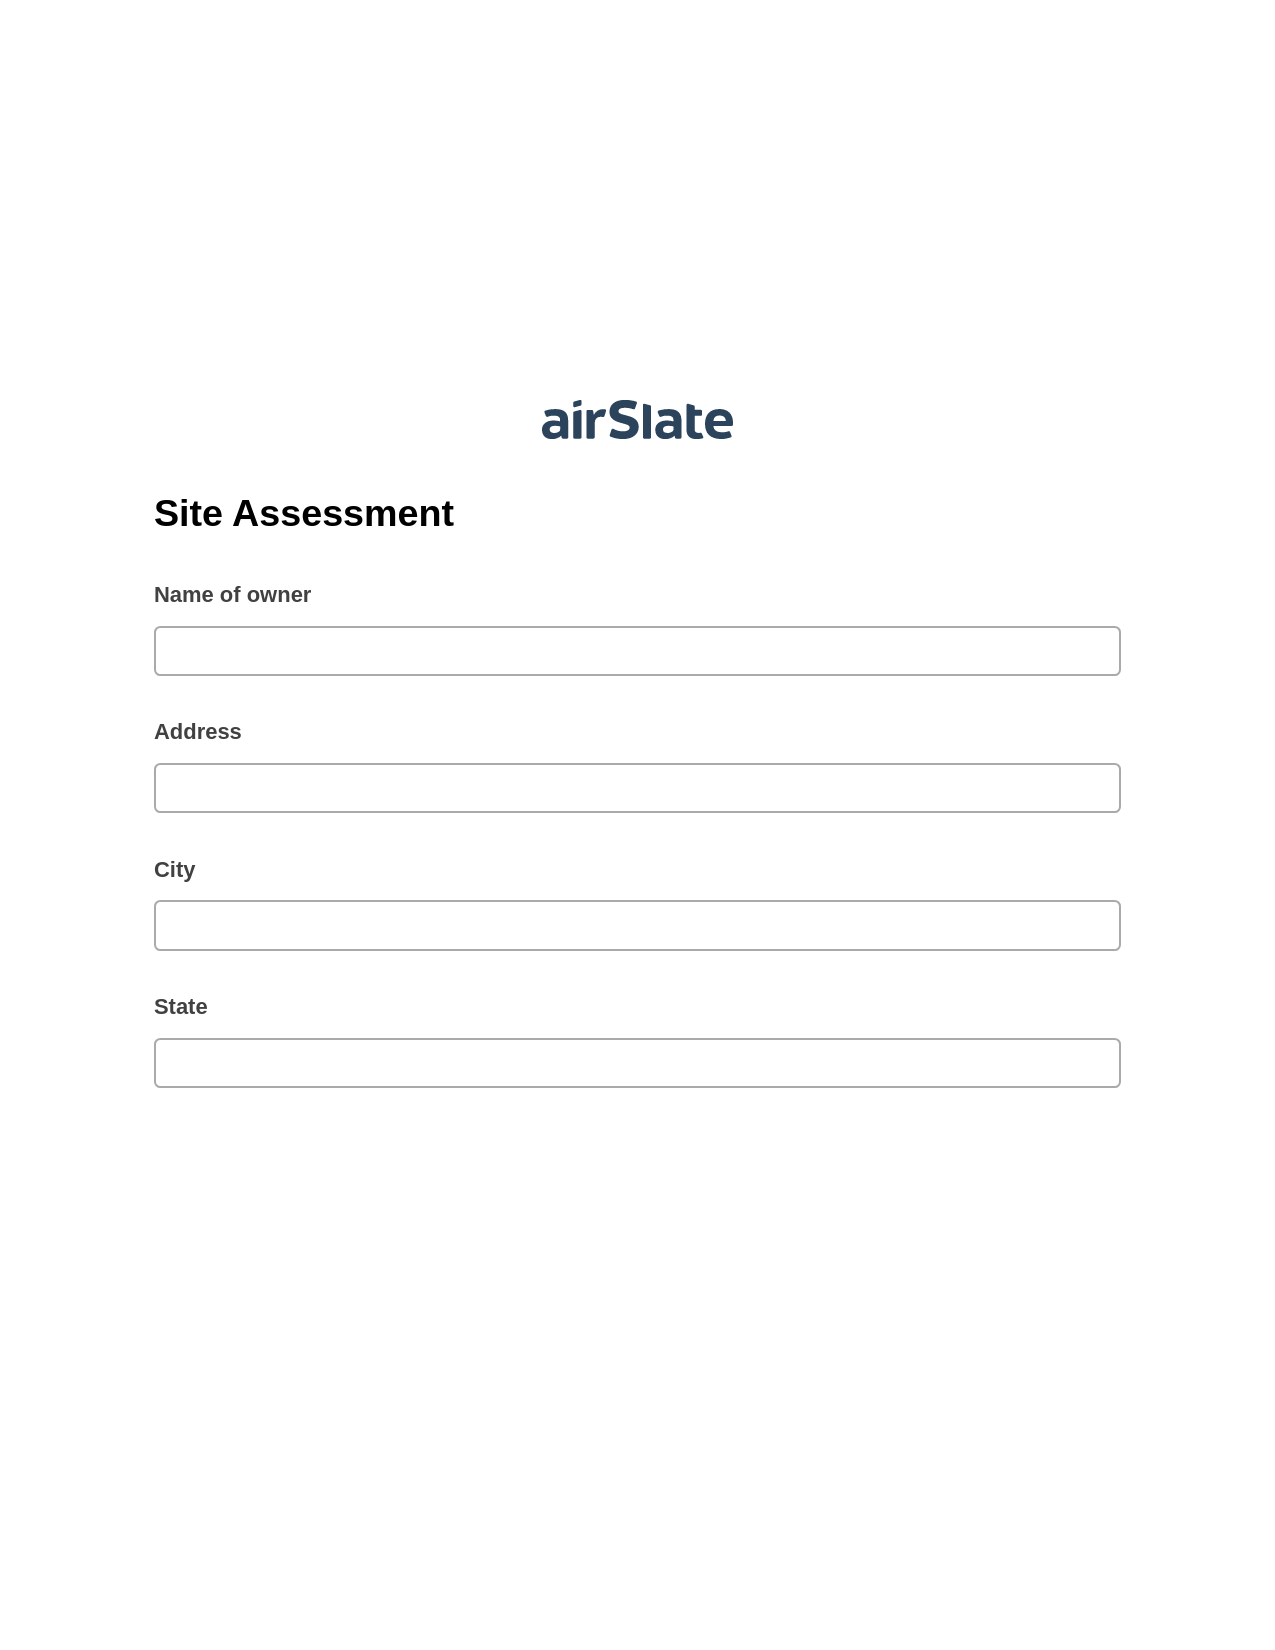 Multirole Site Assessment Pre-fill from Google Sheets Bot, Lock the slate bot, Export to Excel 365 Bot